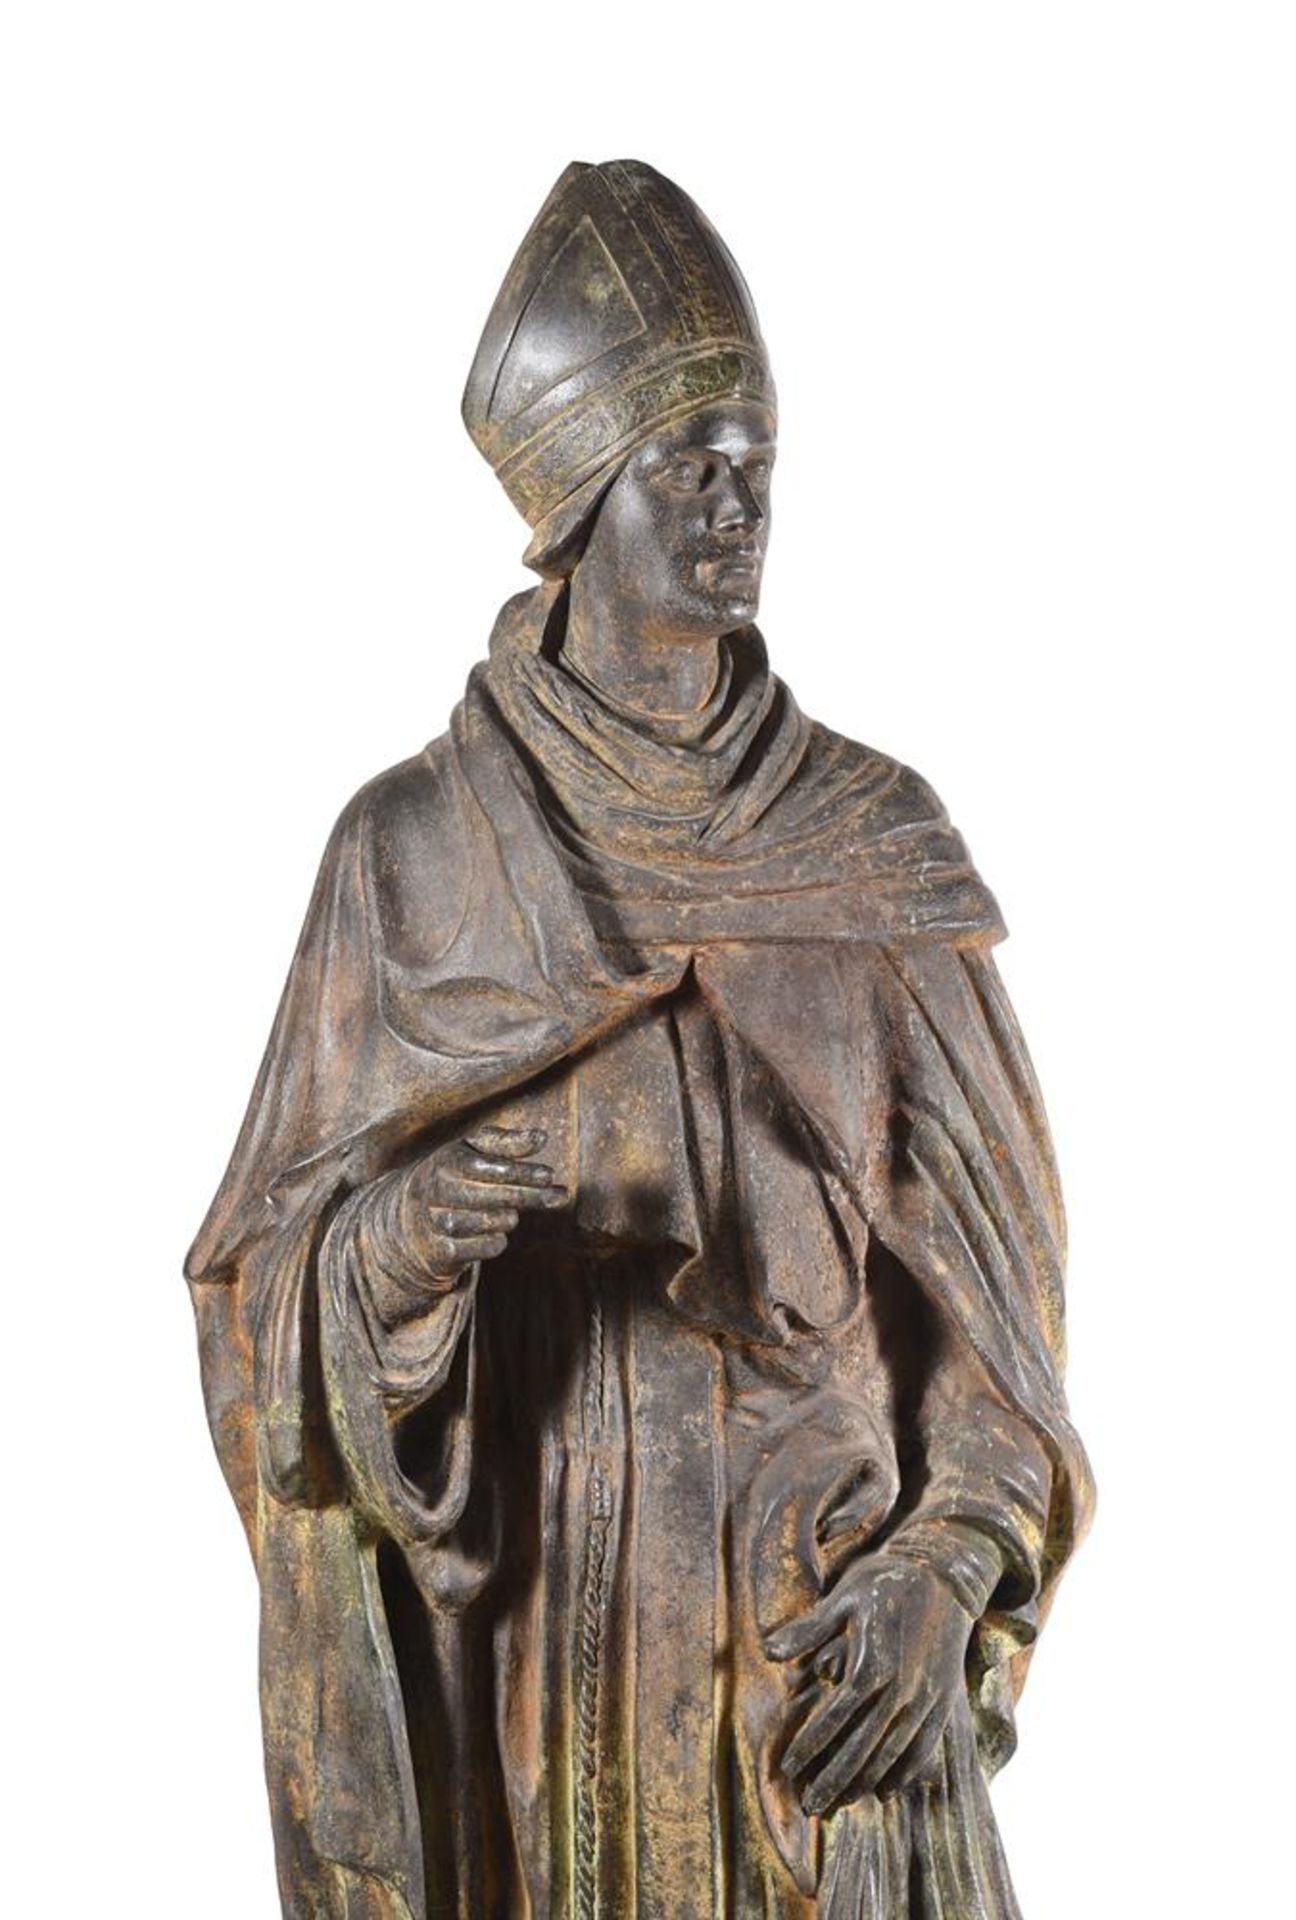 A LIFE SIZE BRONZE FIGURE OF A BISHOP, PROBABLY MID-19TH CENTURY - Image 3 of 4